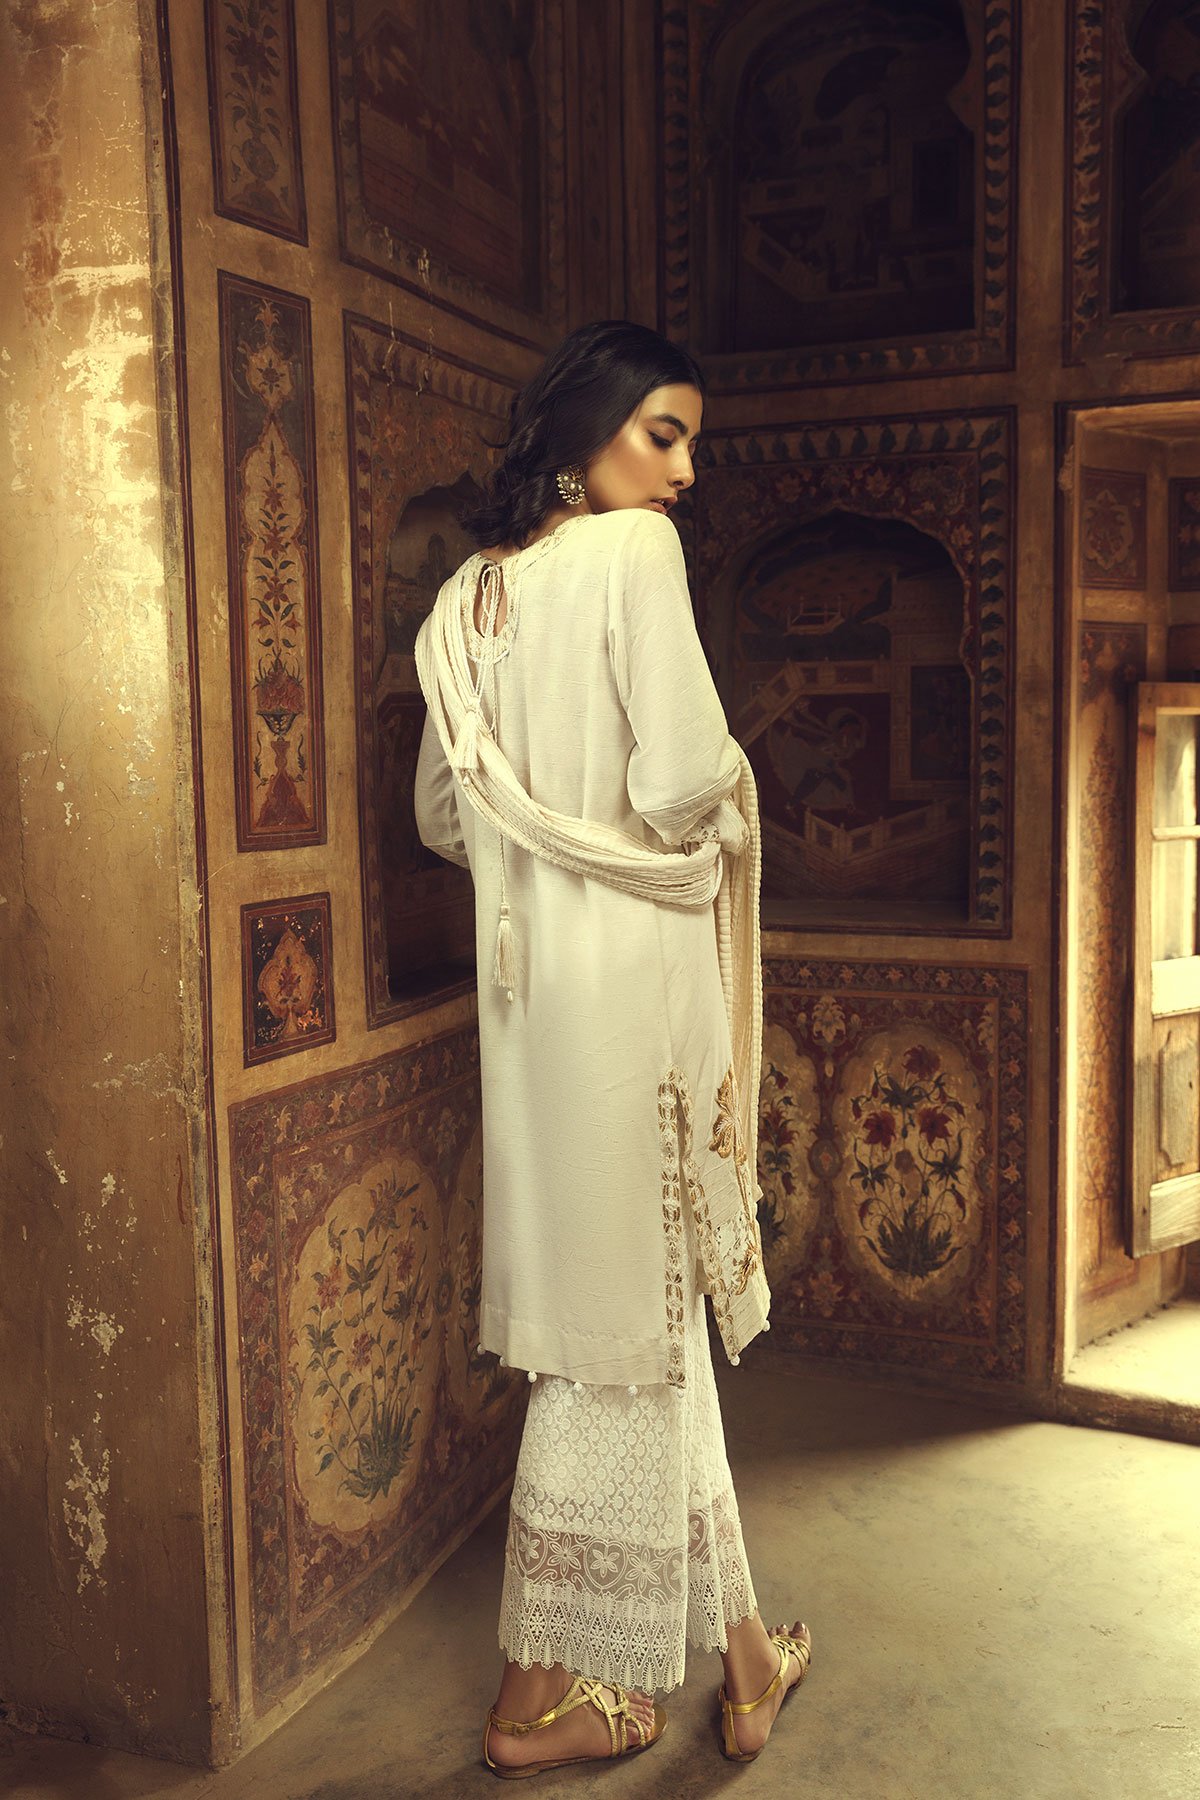 This pretty off-white kurta in a deliciously soft silk karandi fabric has a hibiscus flower embroidered on the front in gold